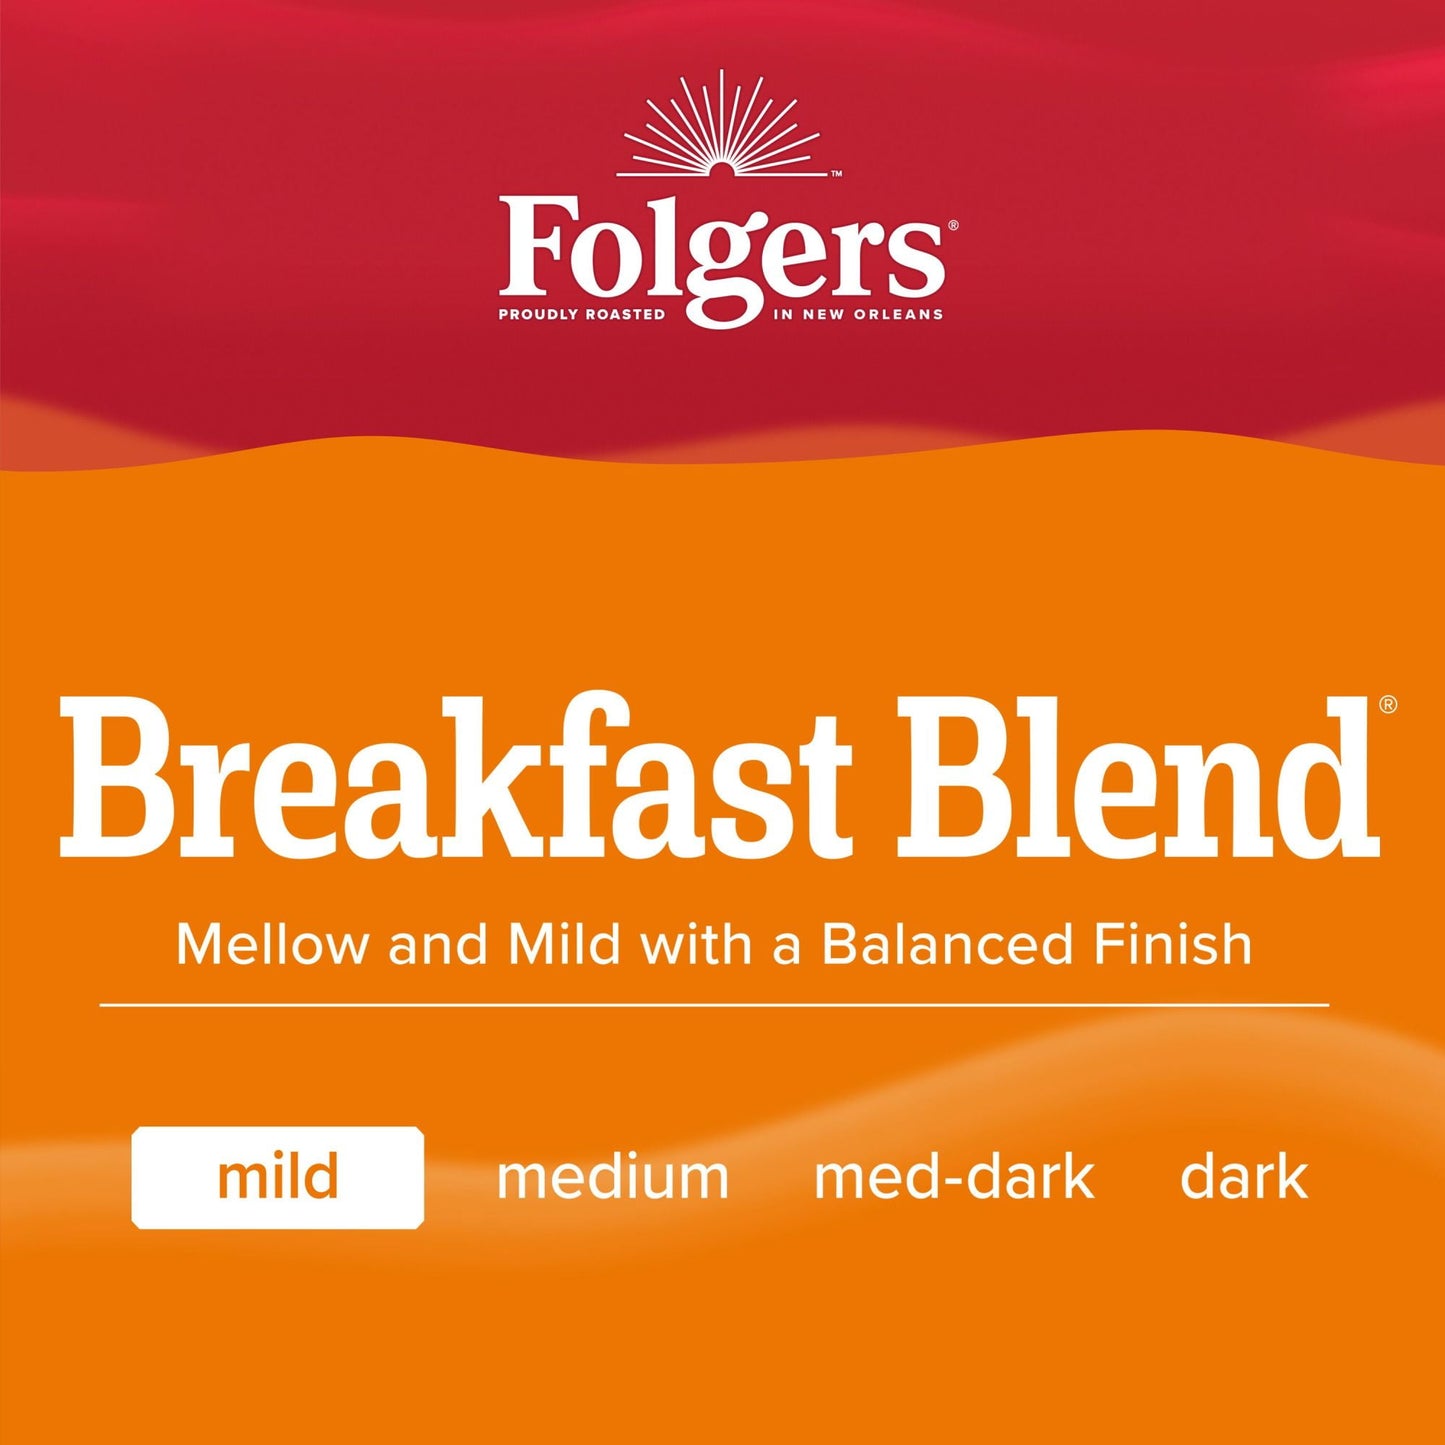 Folgers Breakfast Blend Ground Coffee, Smooth & Mild Coffee, 33.7 Ounce Canister